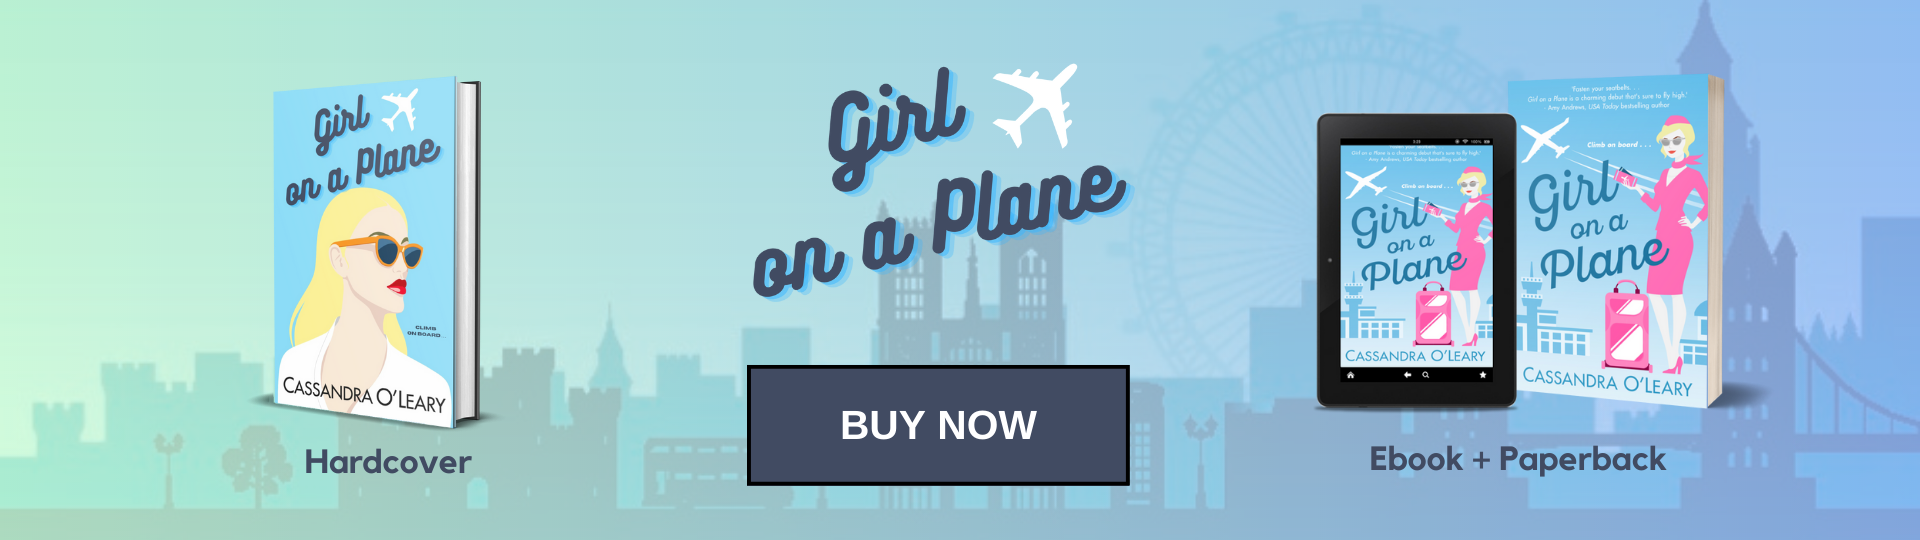 Girl on a Plane header with Buy Now text and book covers